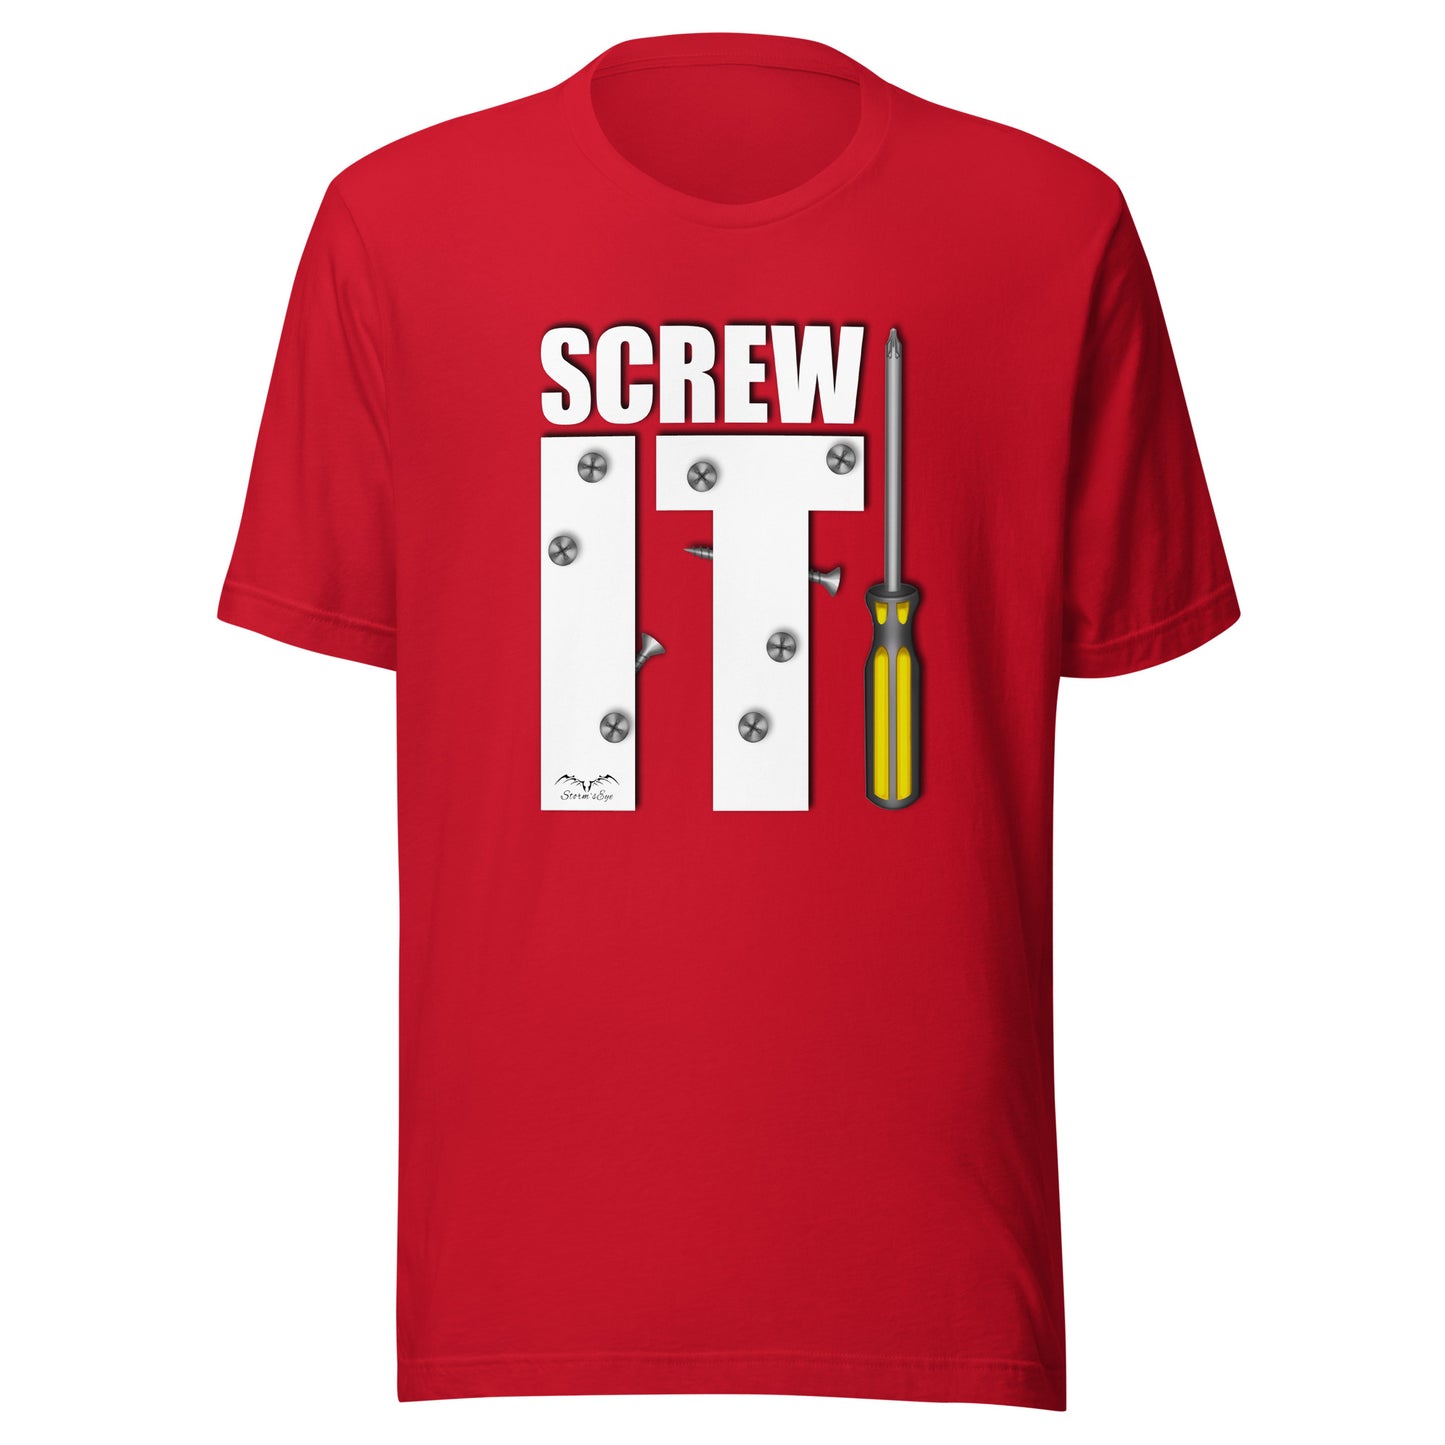 screw it DIY t-shirt bright red, by Stormseye Design